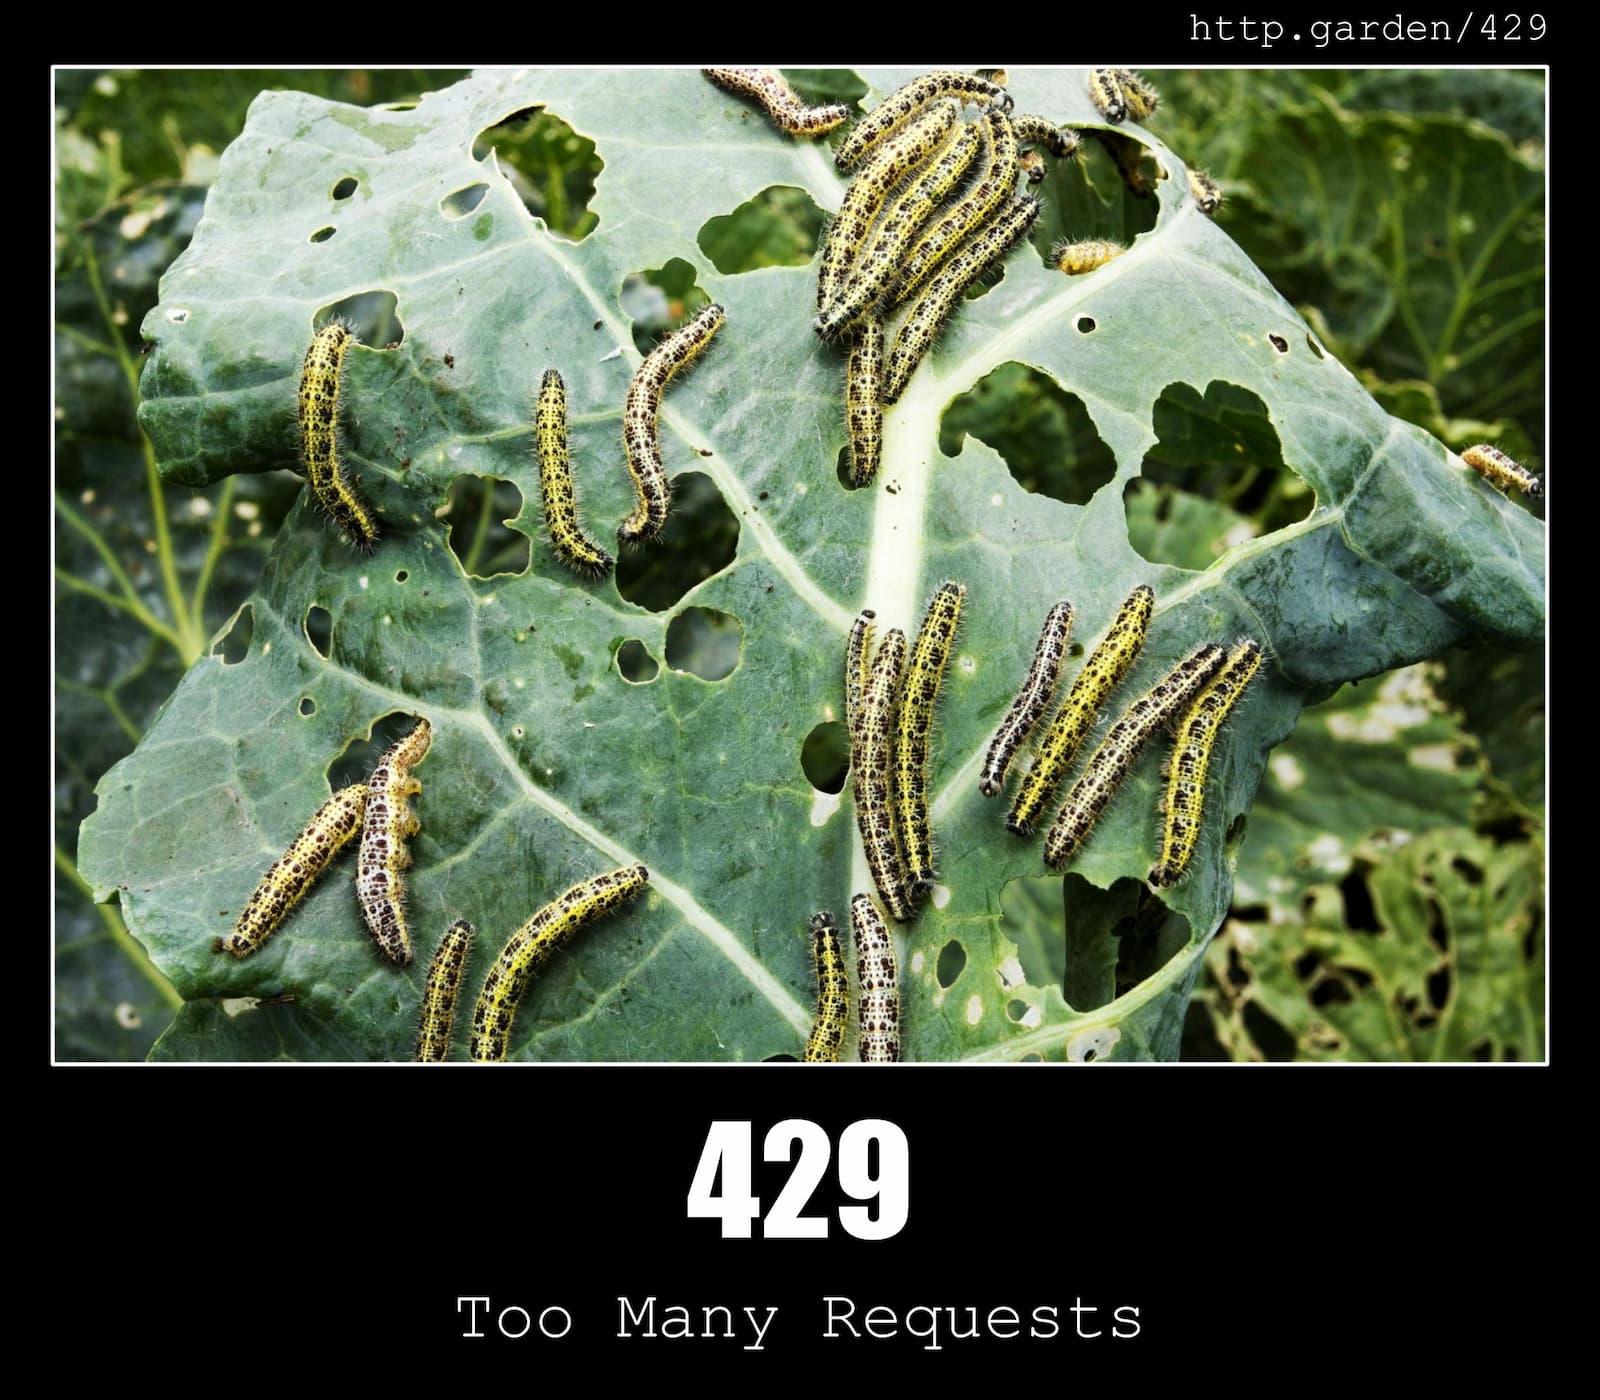 HTTP Status Code 429 Too Many Requests